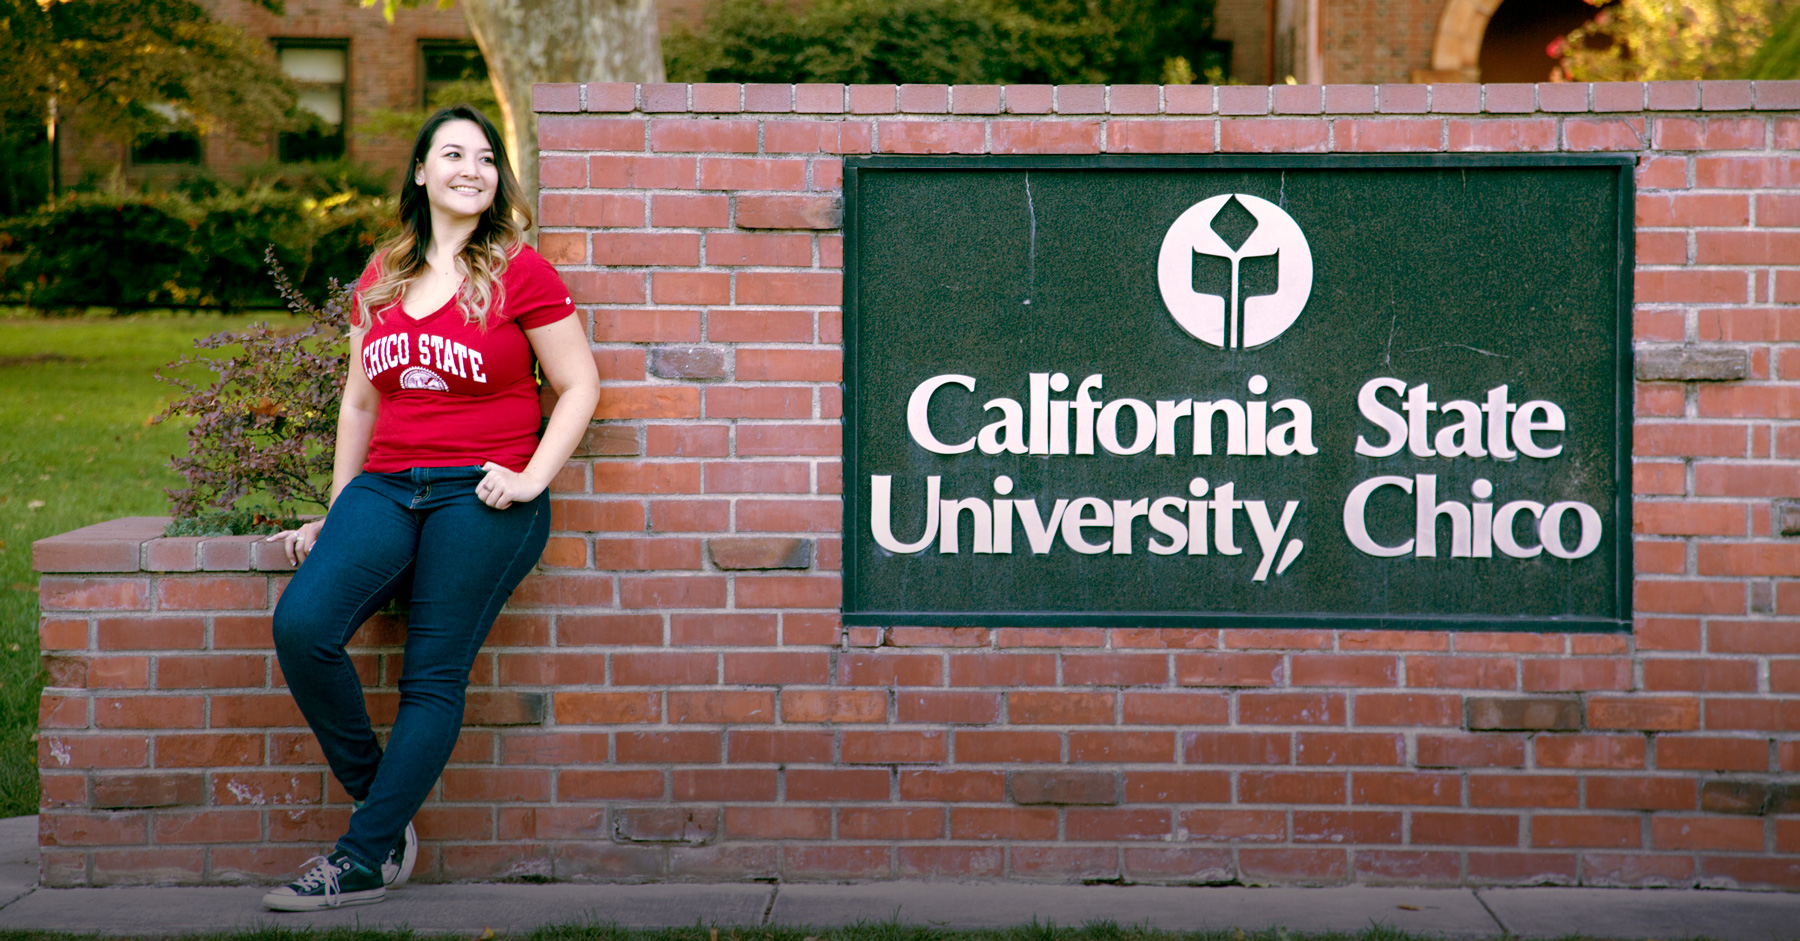 Student poses next to the California State University, Chico, sign.